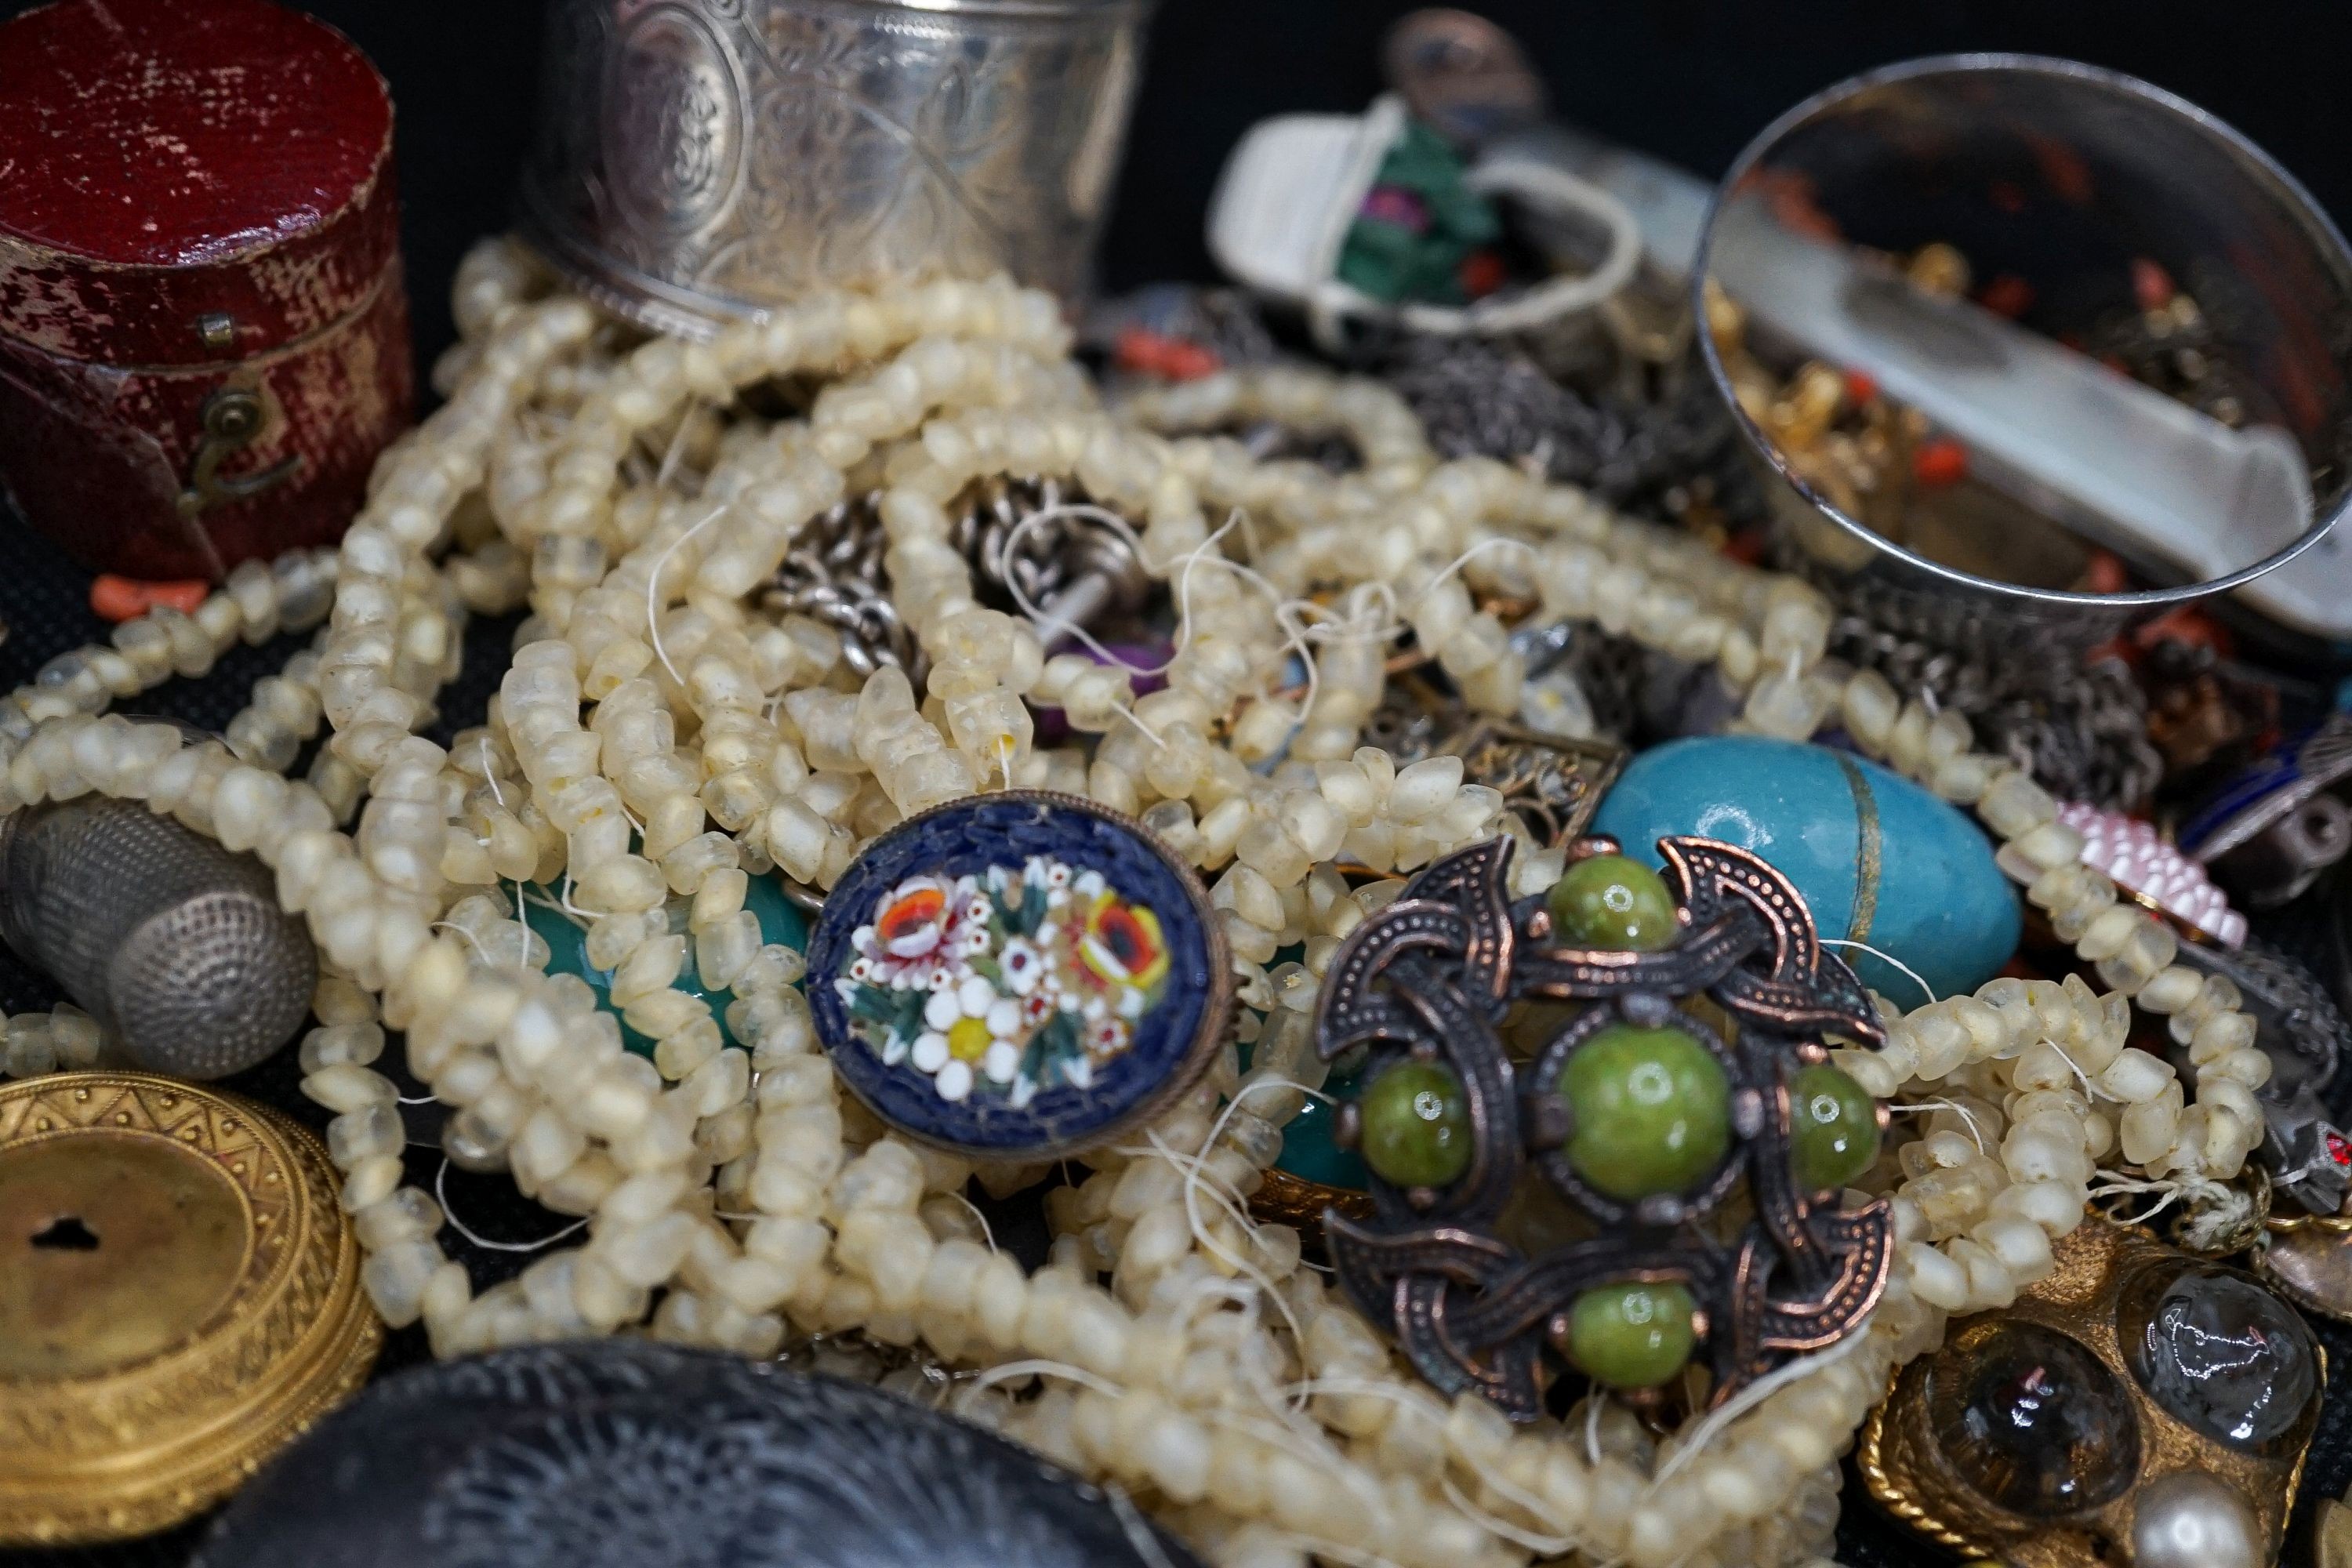 A group of mostly antique minor and costume jewellery